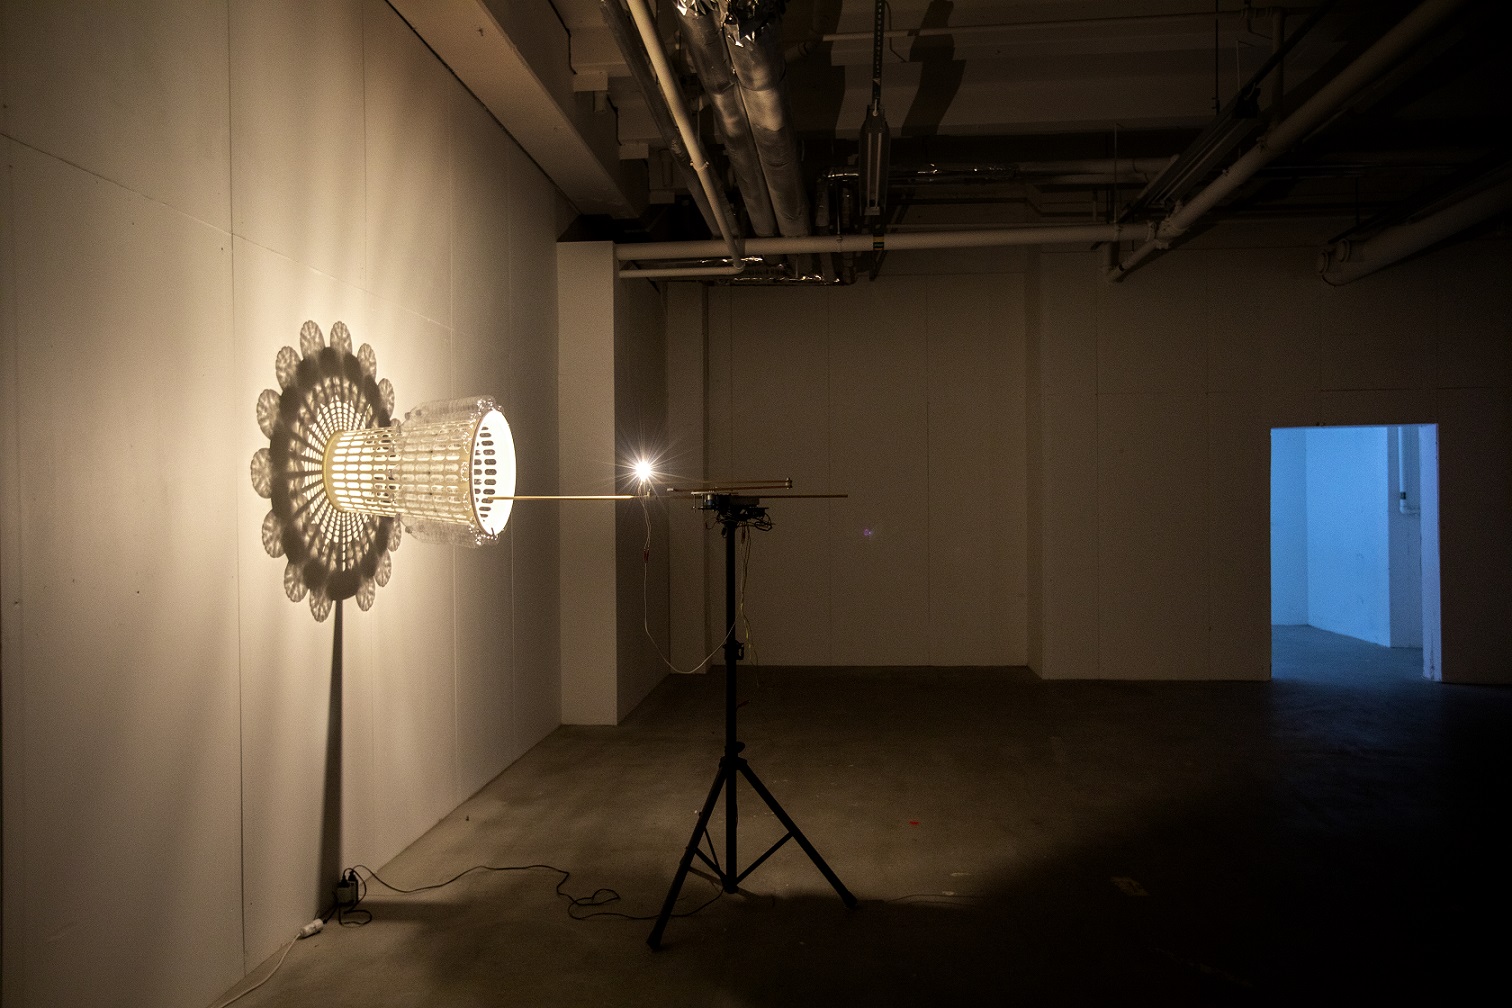 In a dark room stands a black stand with a light on it pointing at an object that looks like a tied plastic basket with plastic bottles attached to the outside. The light reflections turn into an mandala pattern that moves on the wall.